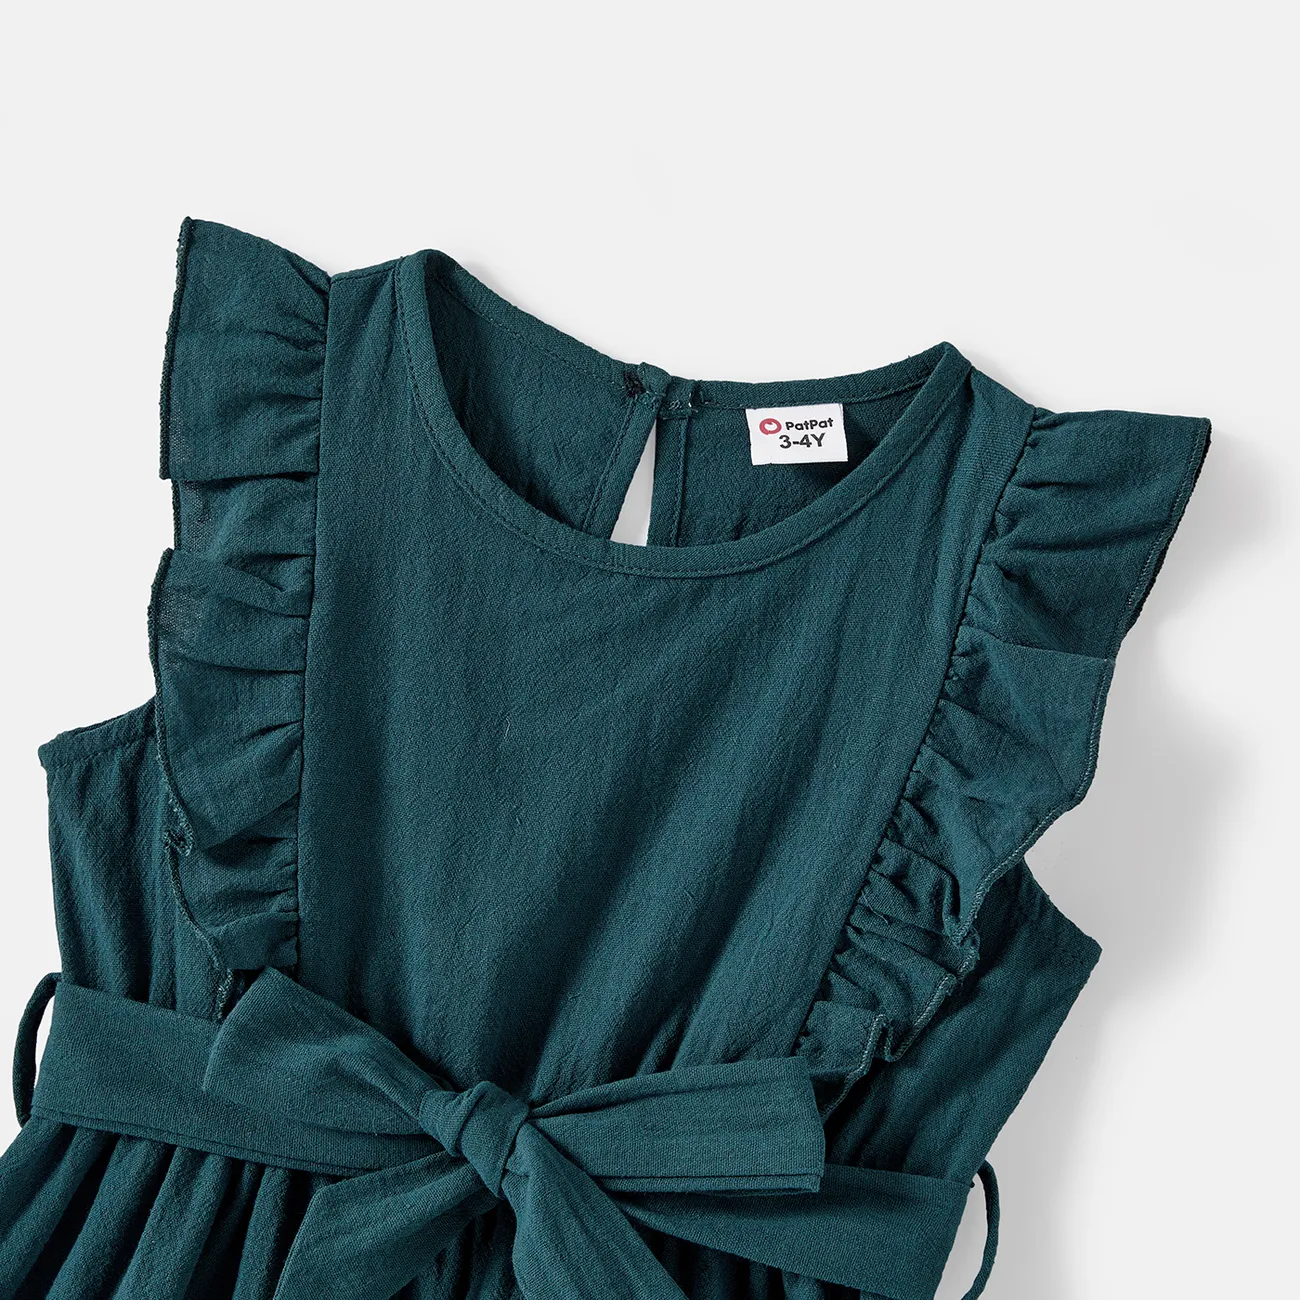 Family Matching Solid Knot Front Cami Dresses and Colorblock Short-sleeve Tee Sets Green* big image 1